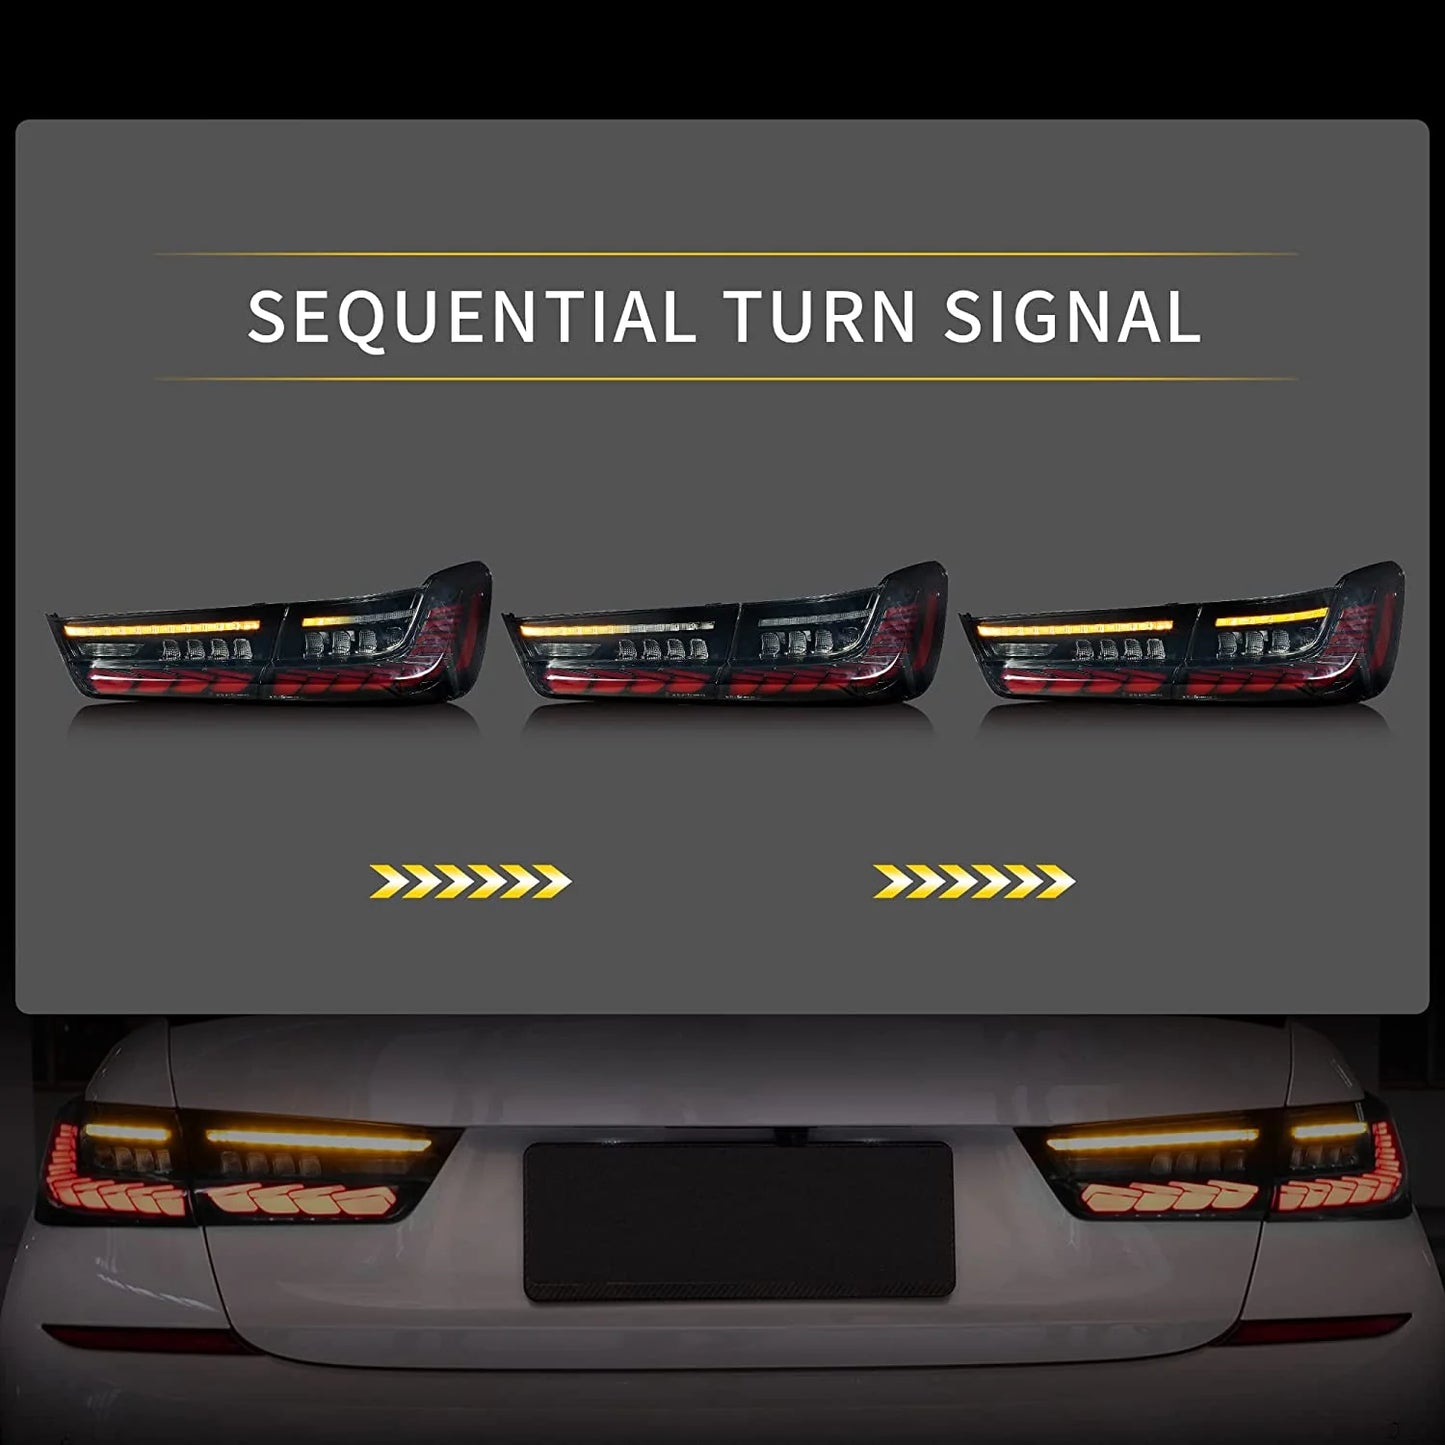 VLAND OLED Tail Lights for BMW G20 G80 M3 GTS